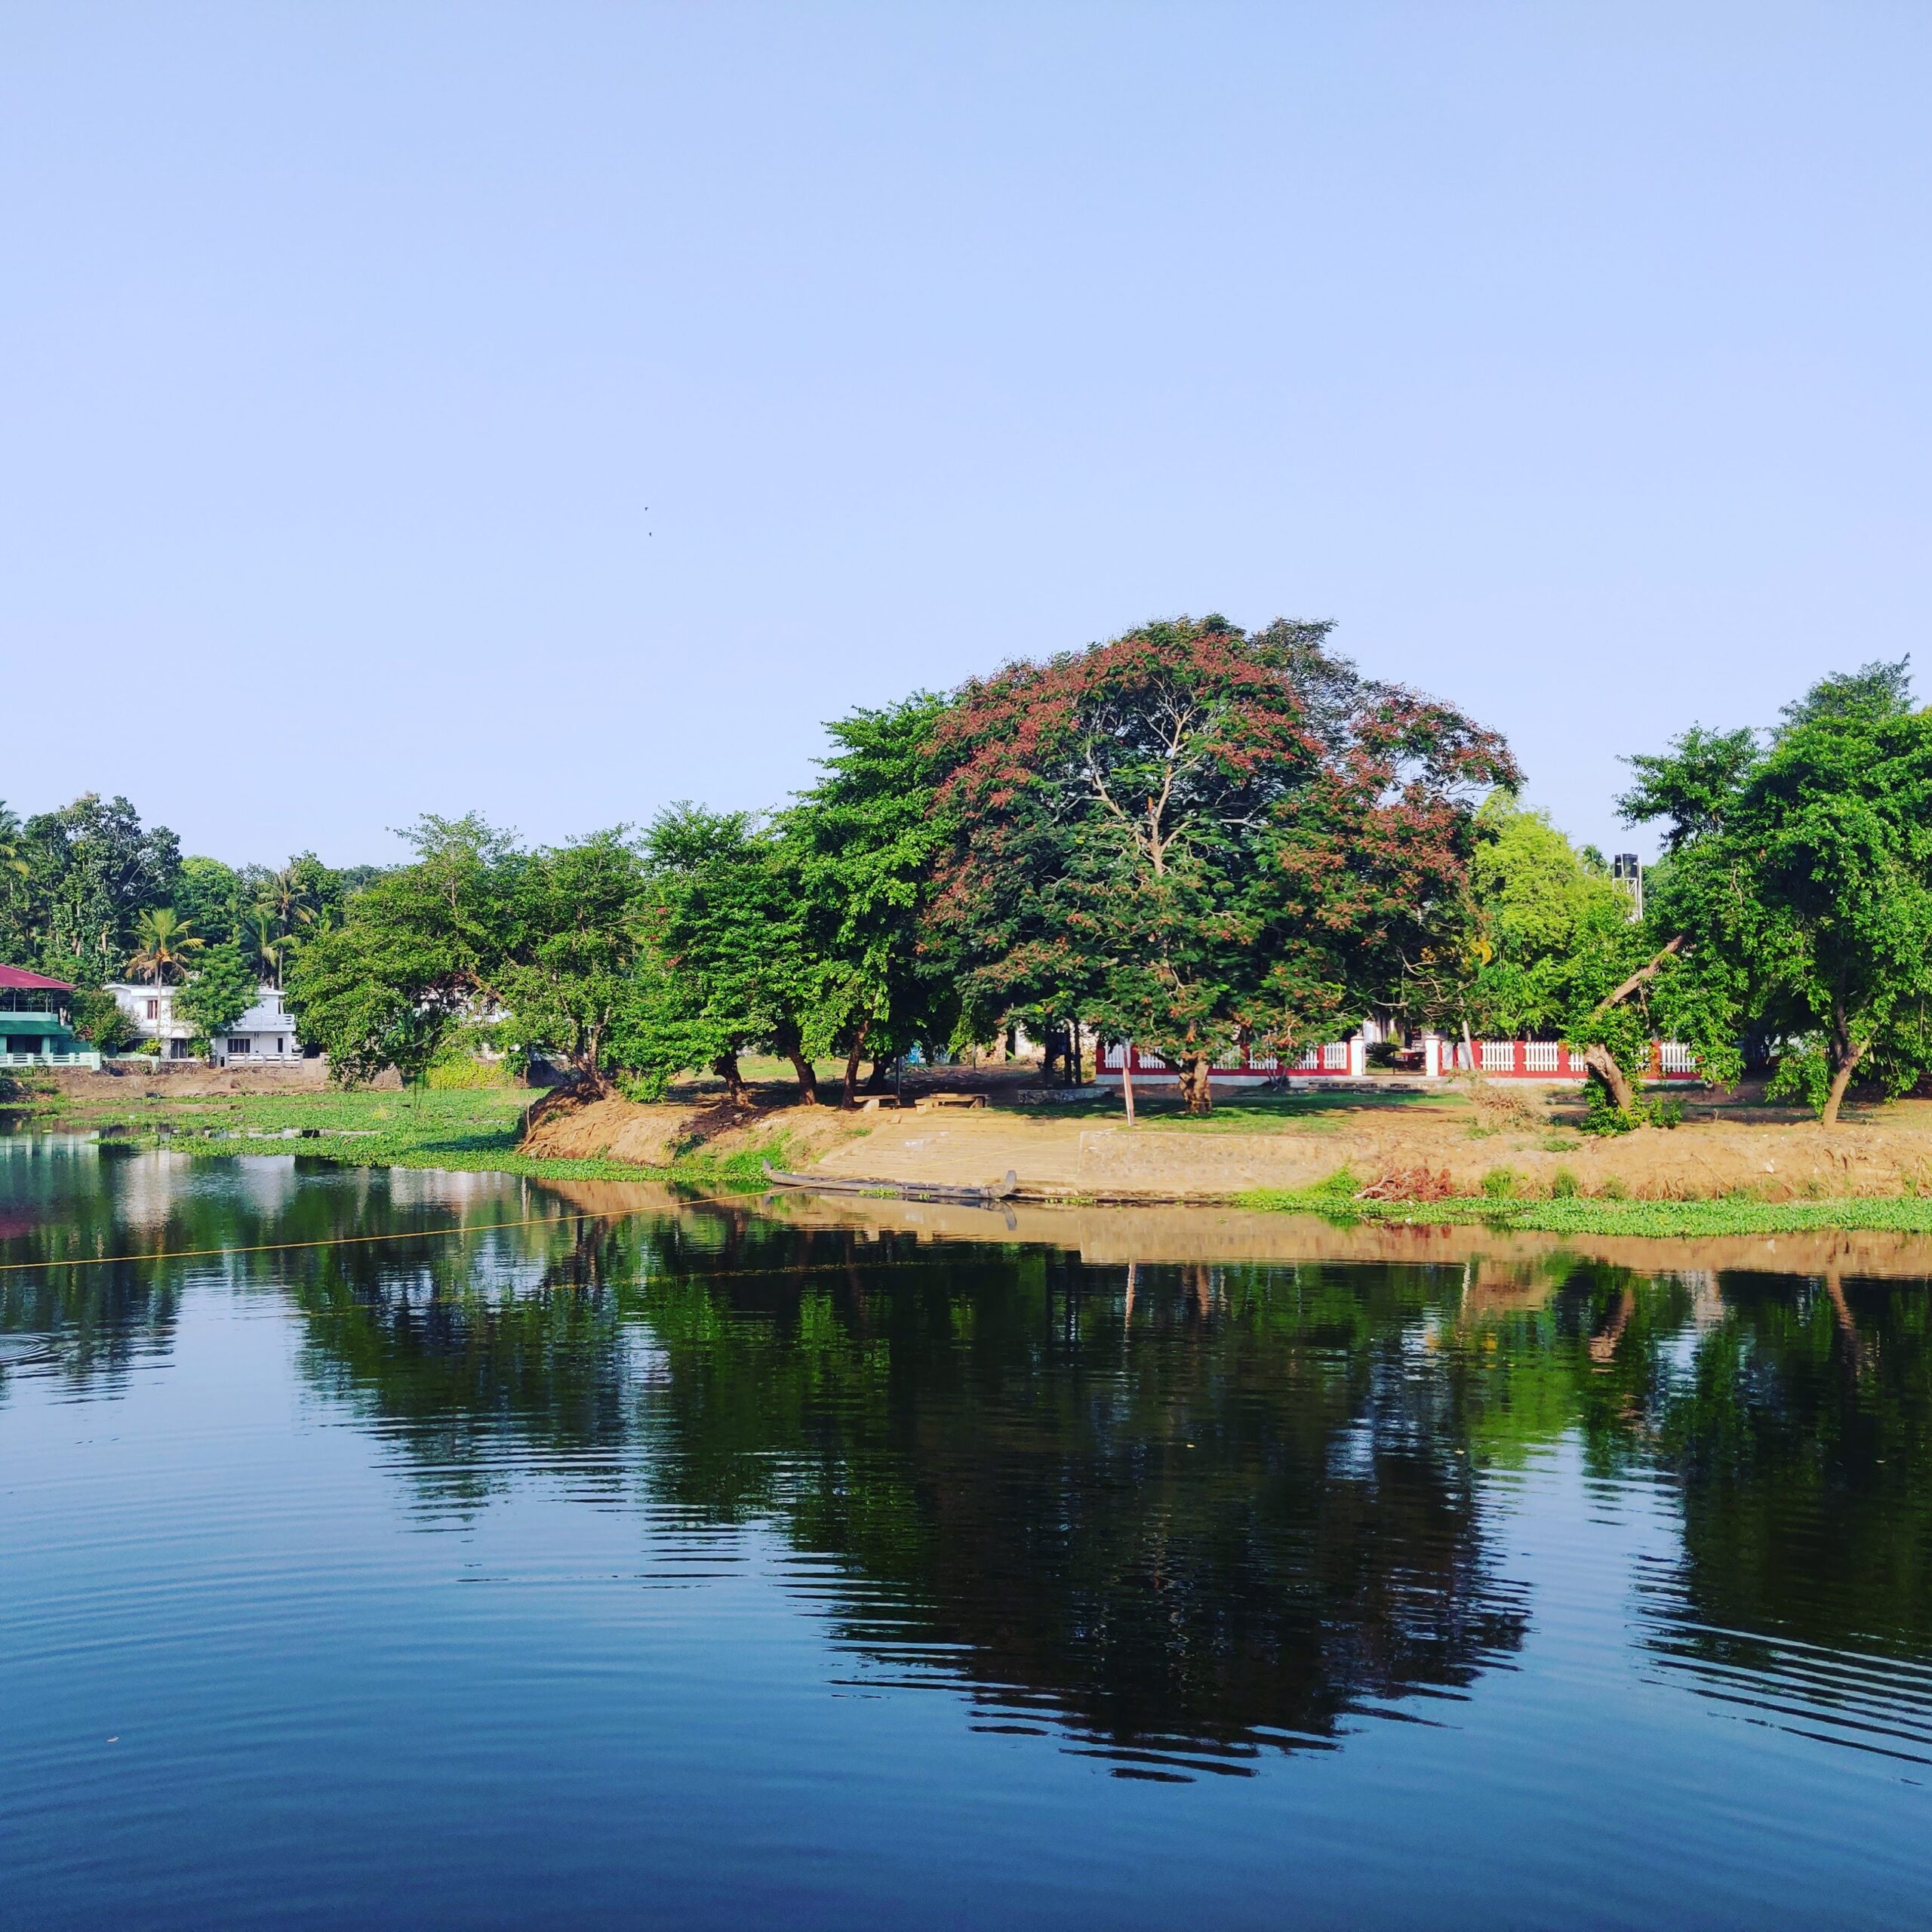 Surrounded by the Meenachil River on three sides, breathe in the crisp countryside air.